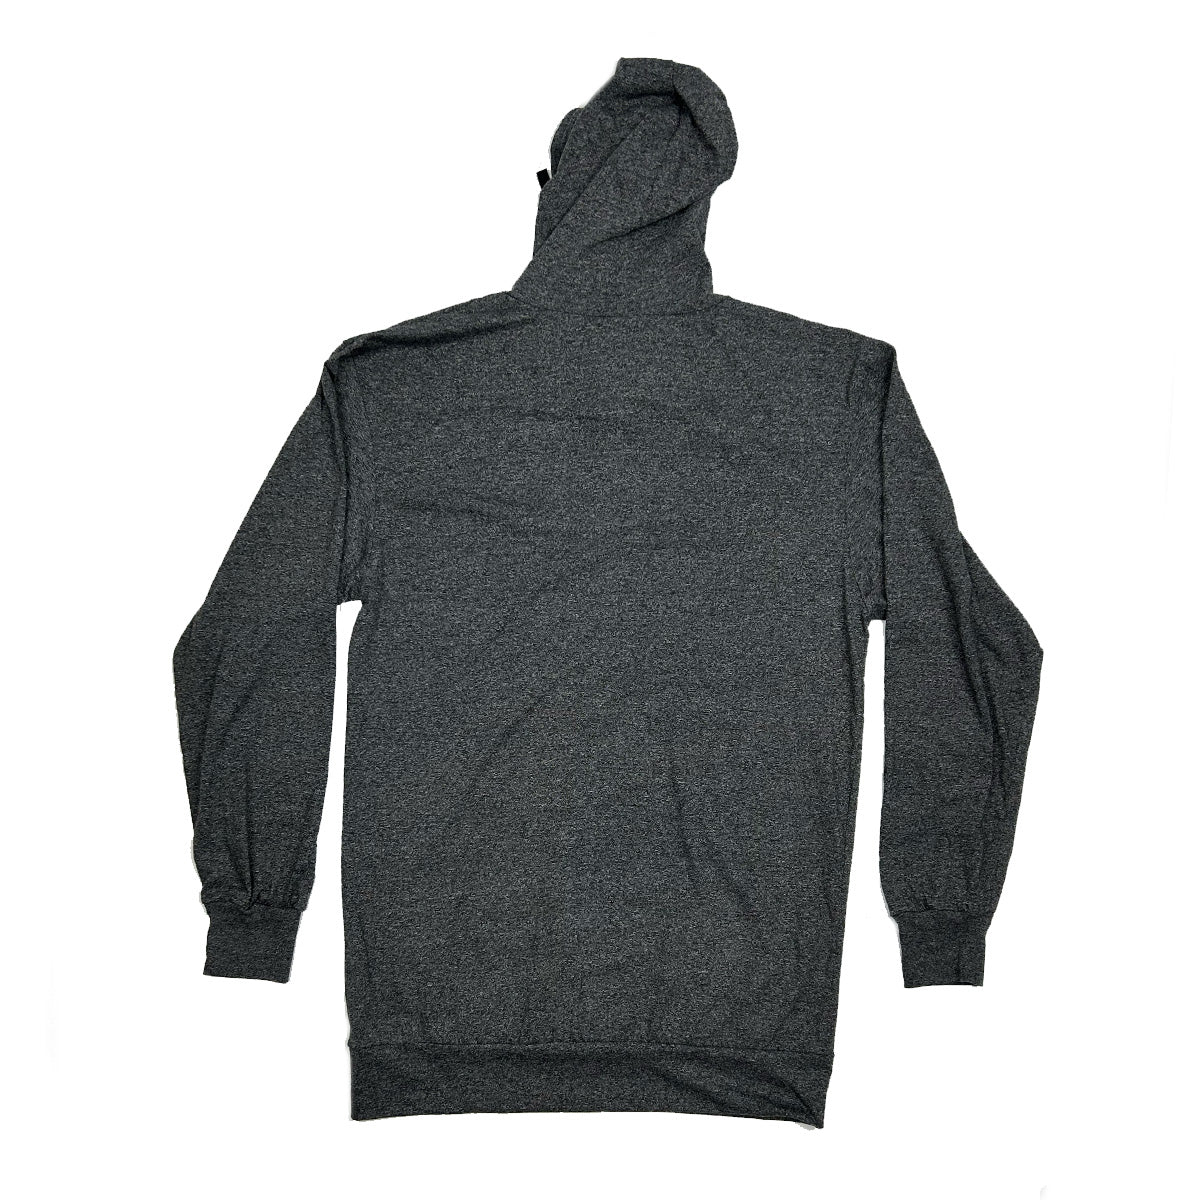 Long Sleeve Charcoal   T-Shirt with Hoodie, Pack of 6 Units-2M, 2L, 2XL